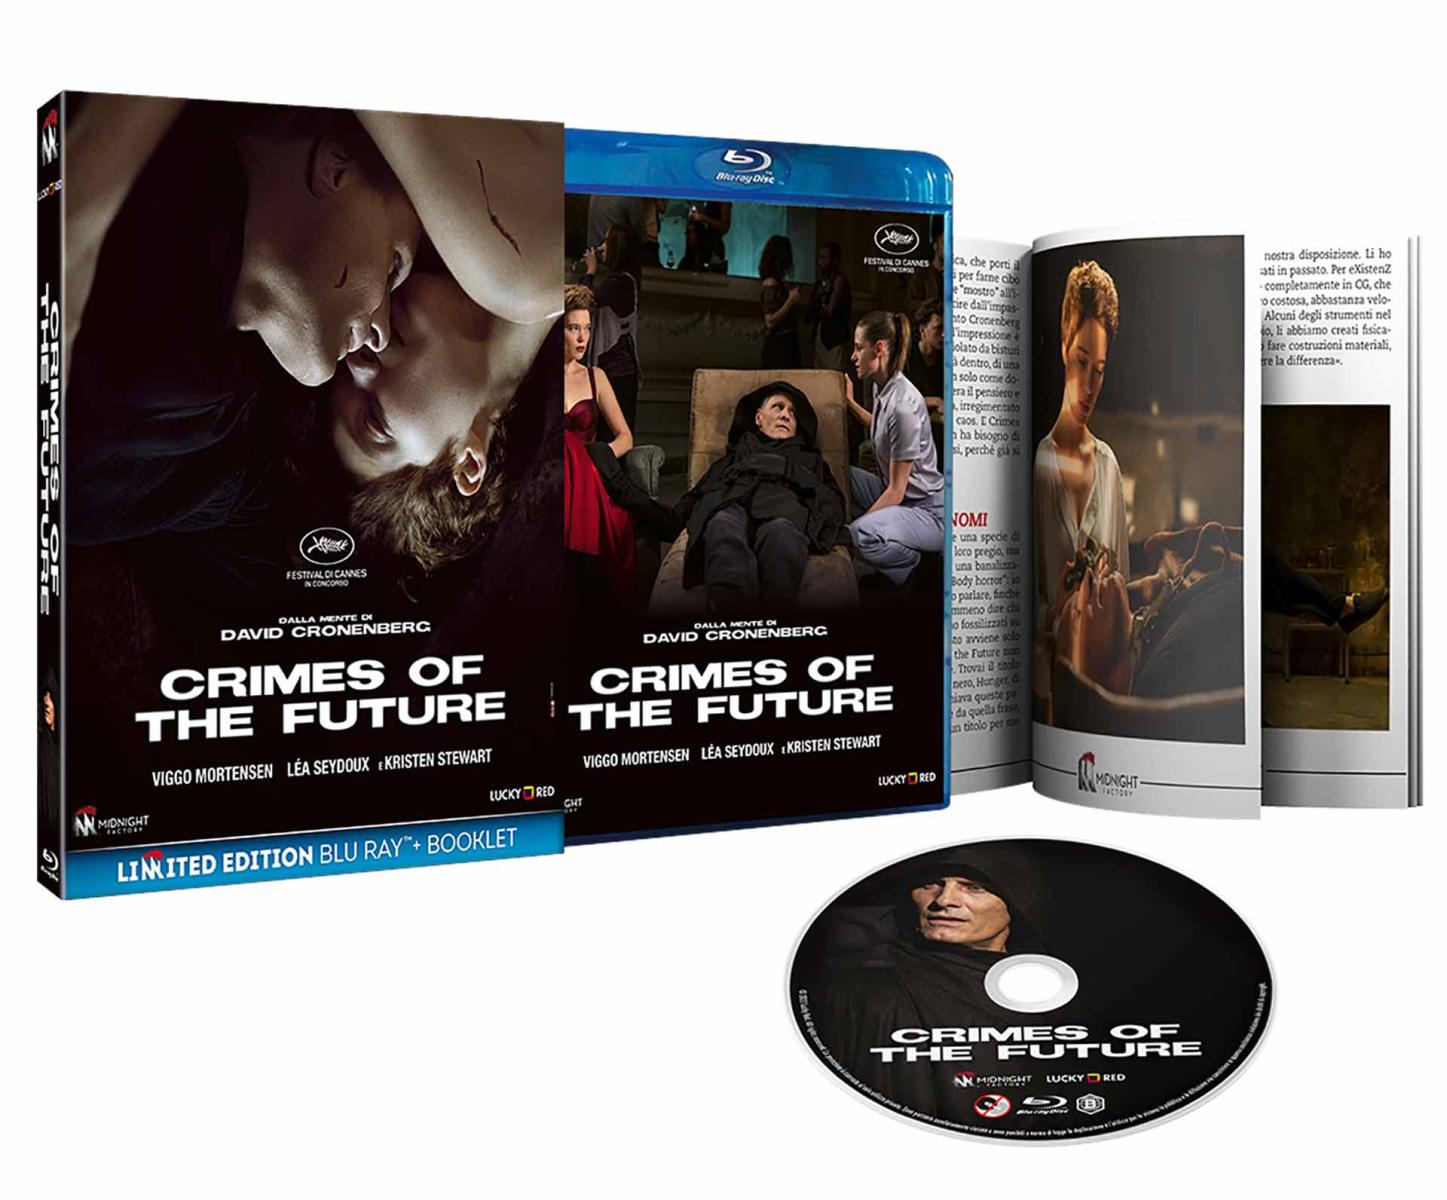 Crimes of the Future - Limited Edition Blu-ray + Booklet (Blu-ray) Image 8